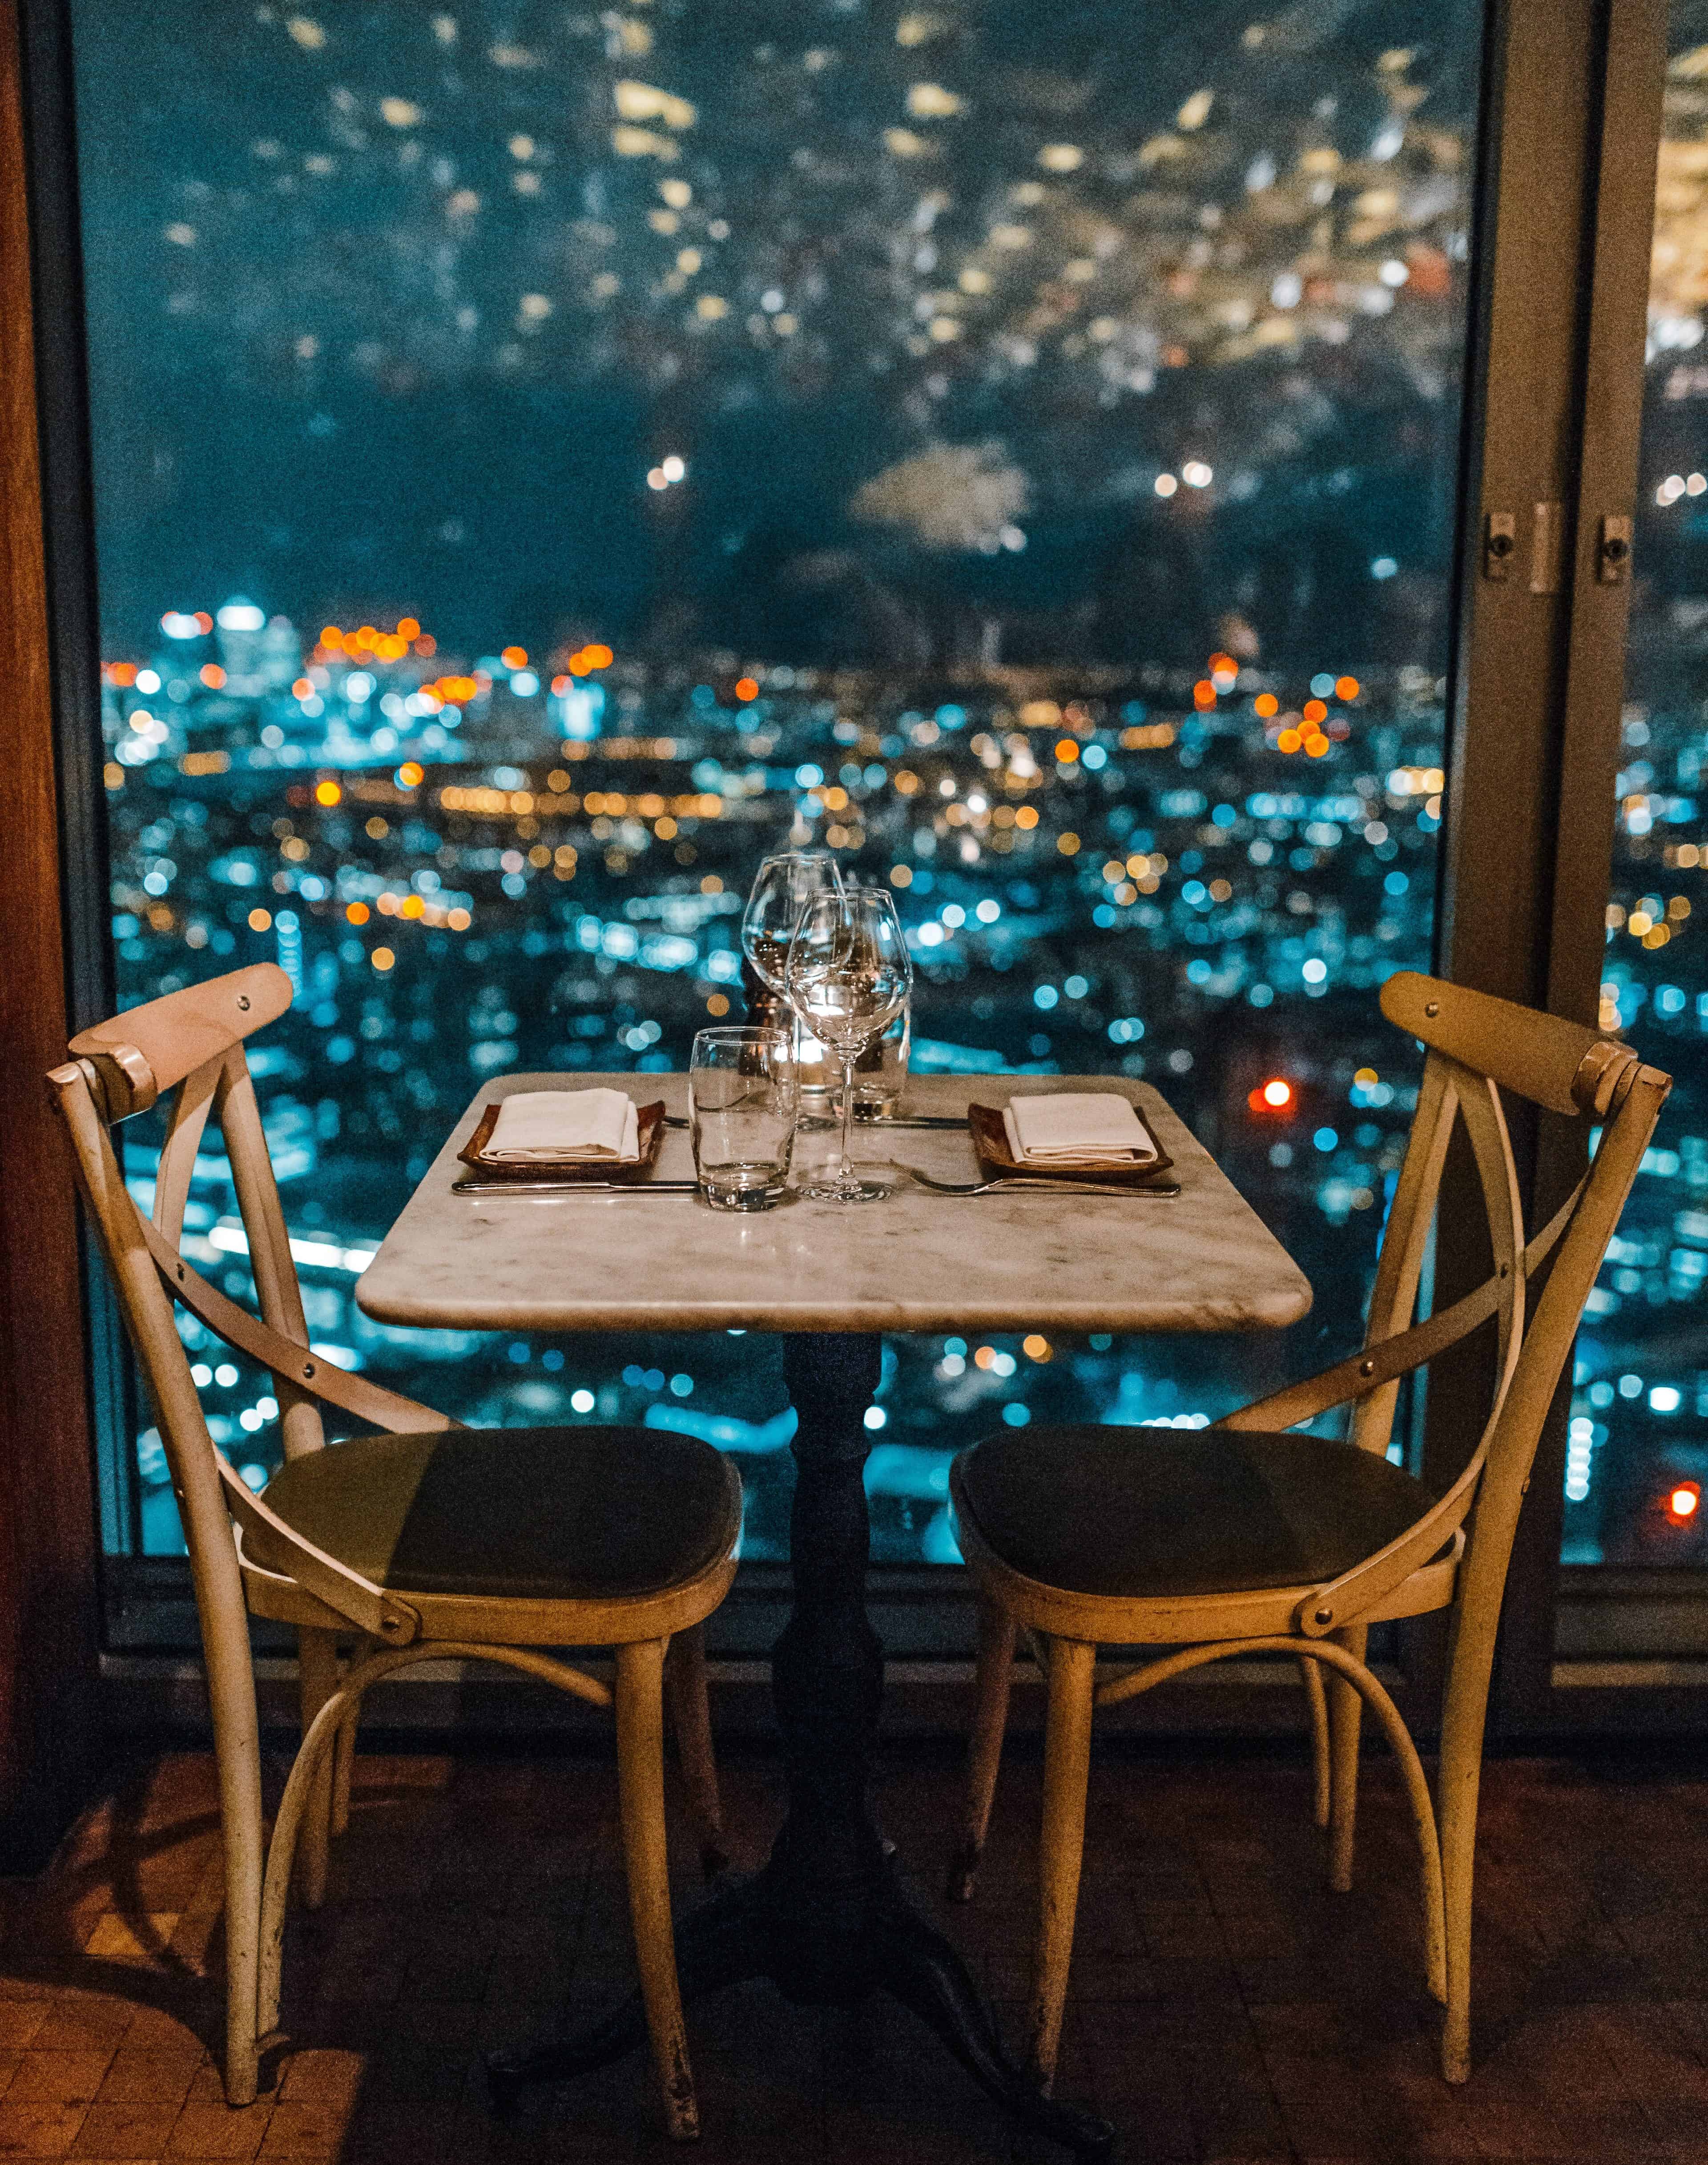 Five Ways to Make Your Restaurant Date-Friendly